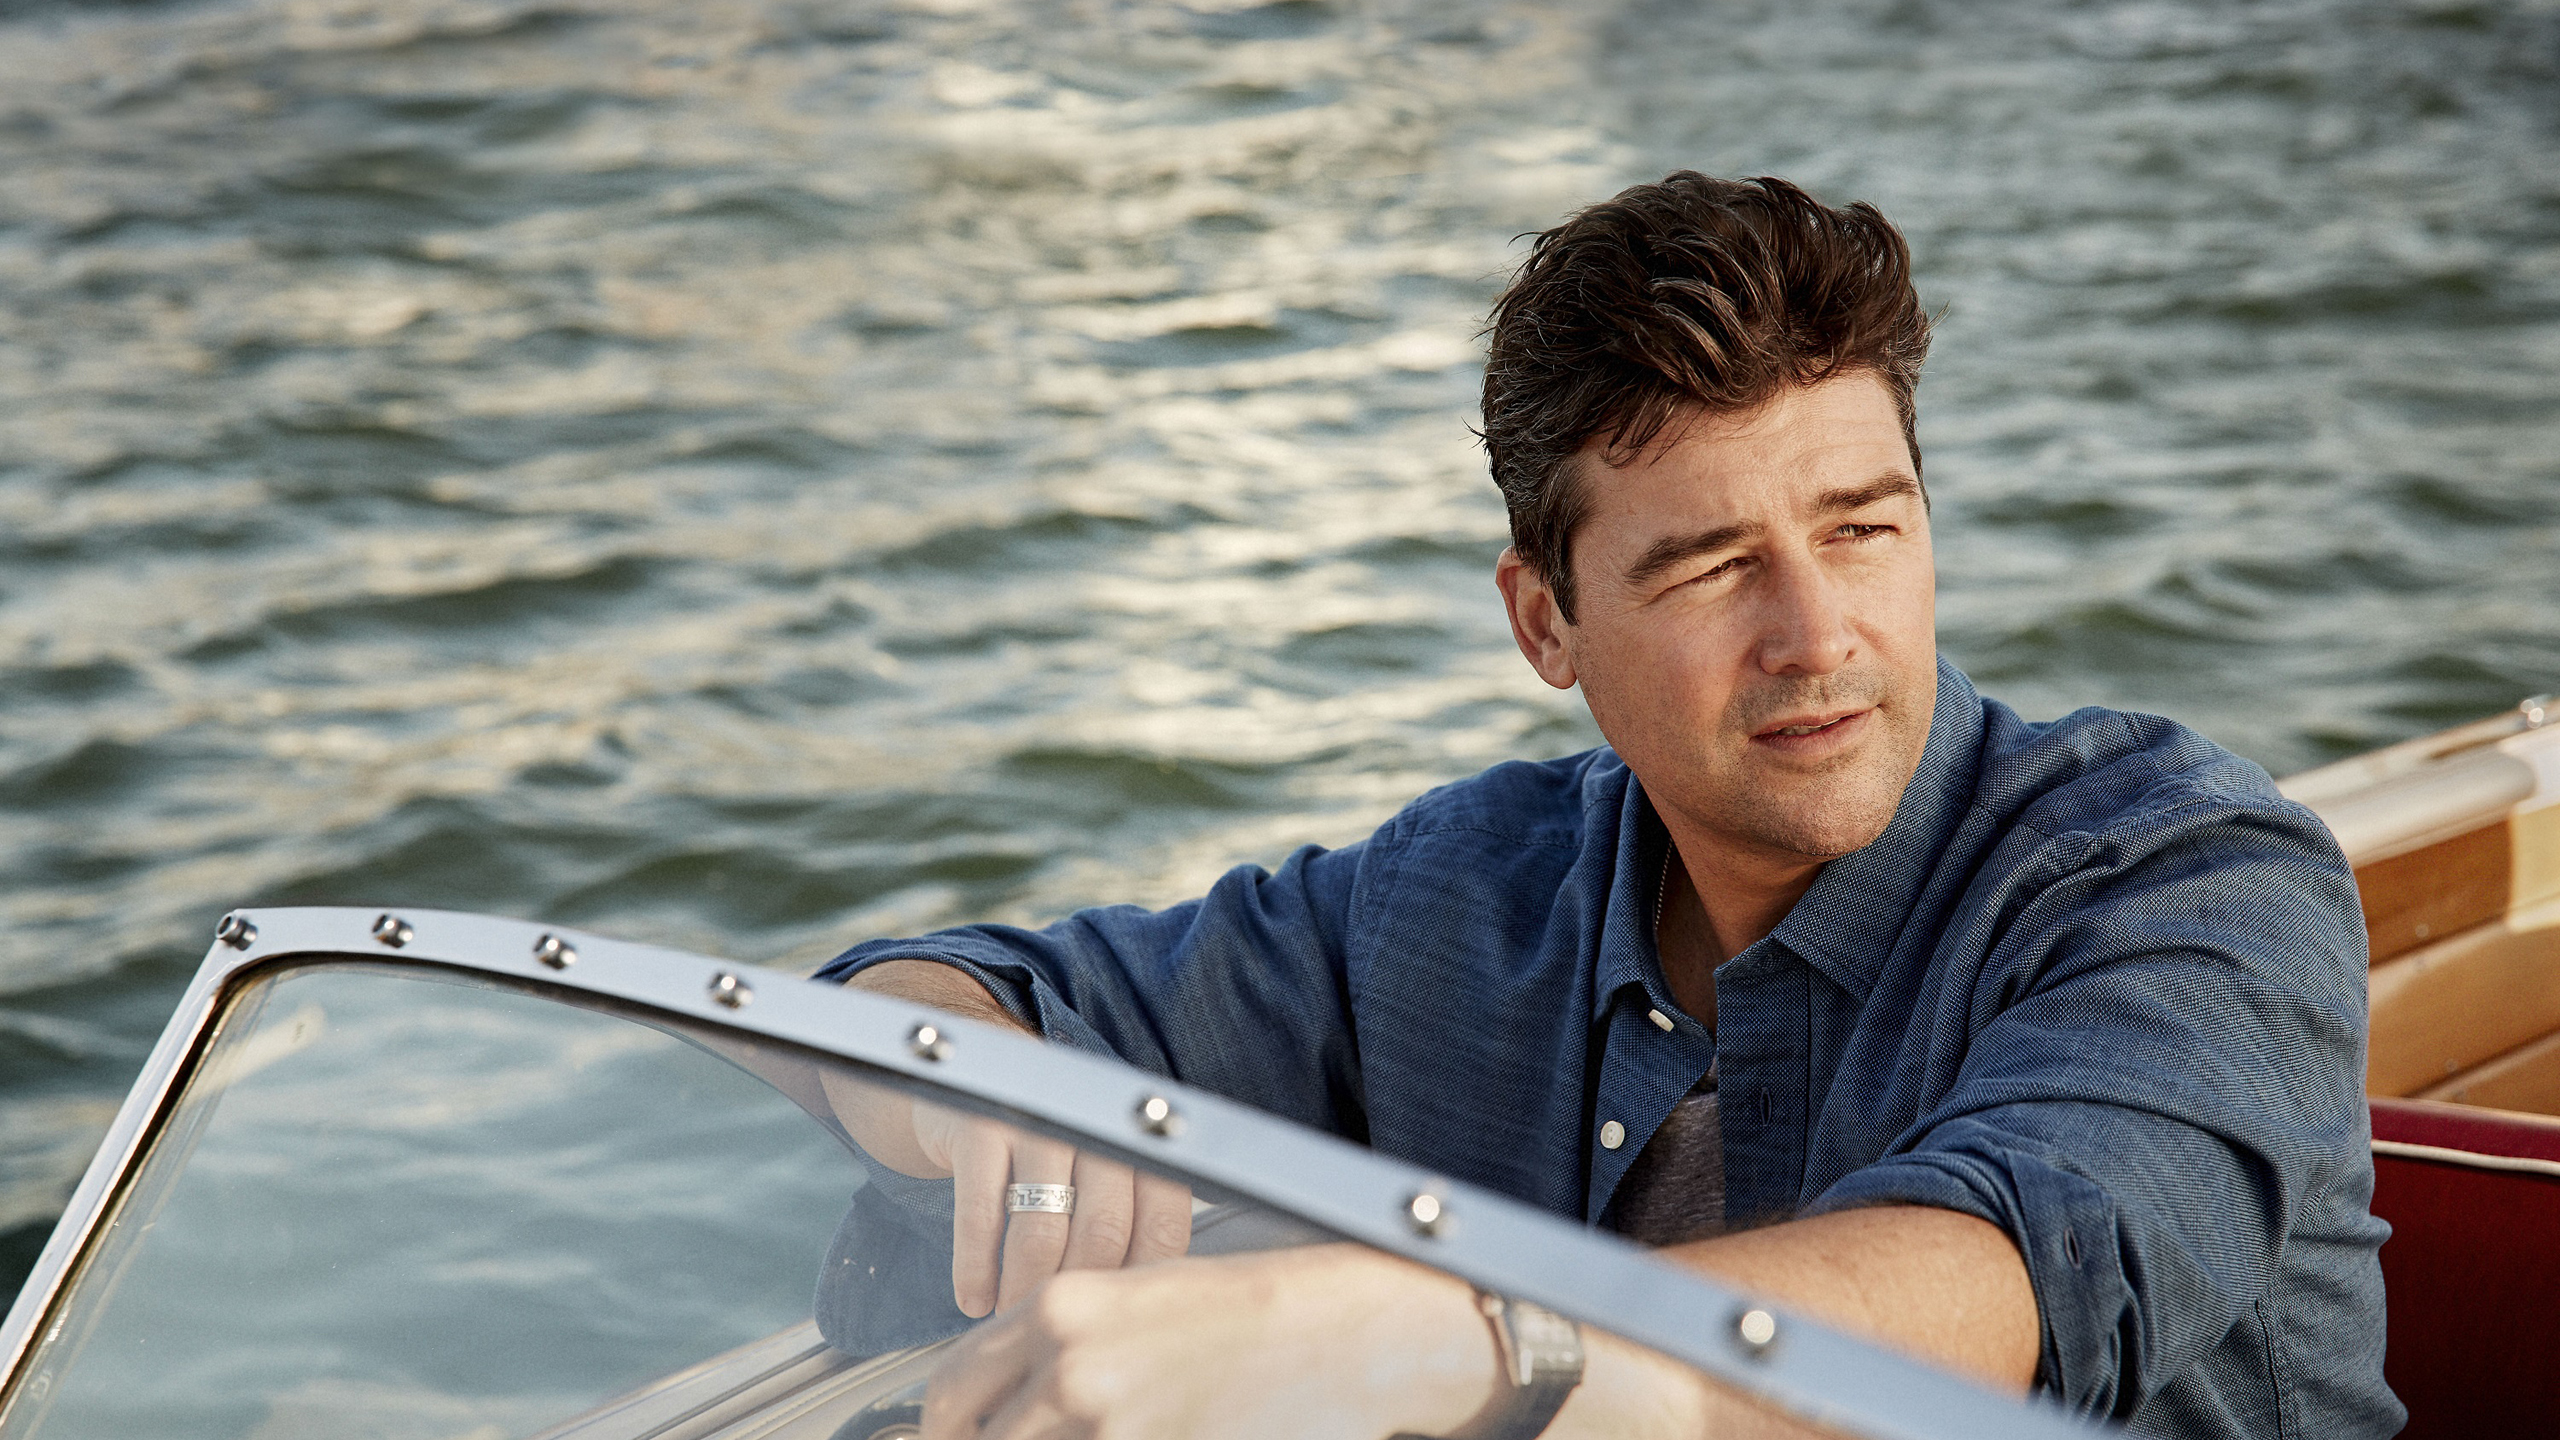 Actor Kyle Chandler Is Driving A Boat HD Kyle Chandler